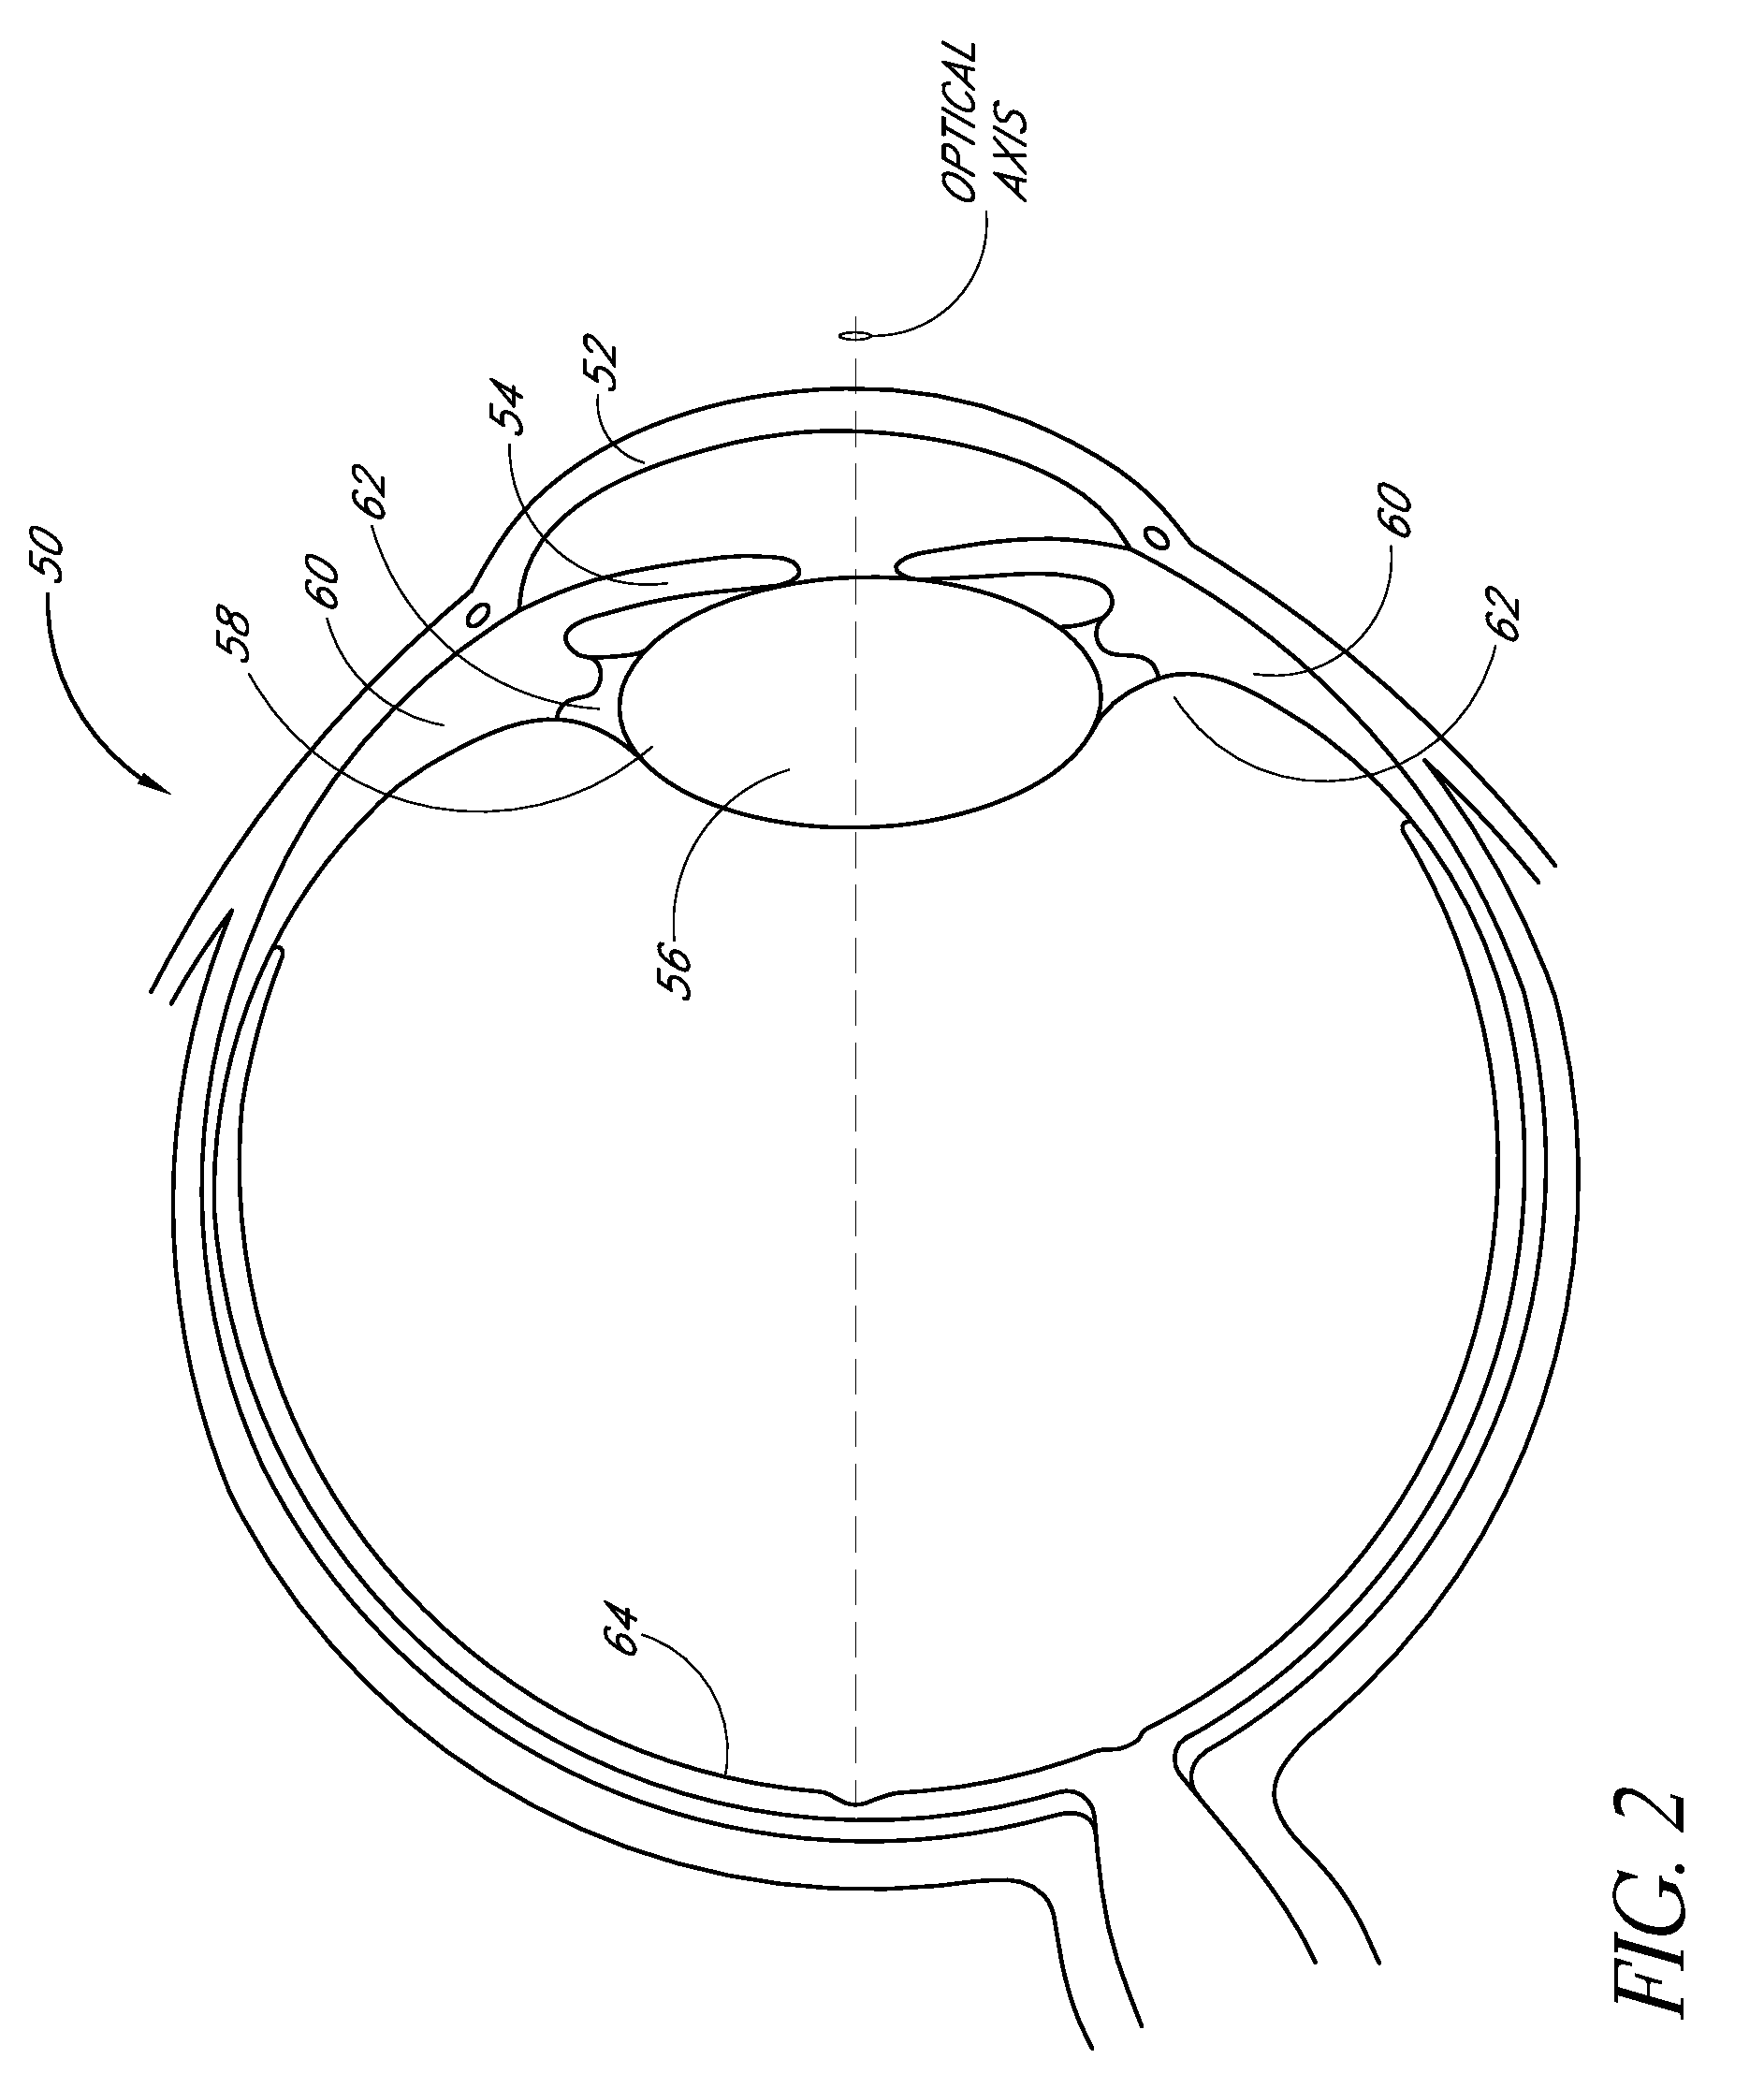 Intraocular lens with post-implantation adjustment capabilities